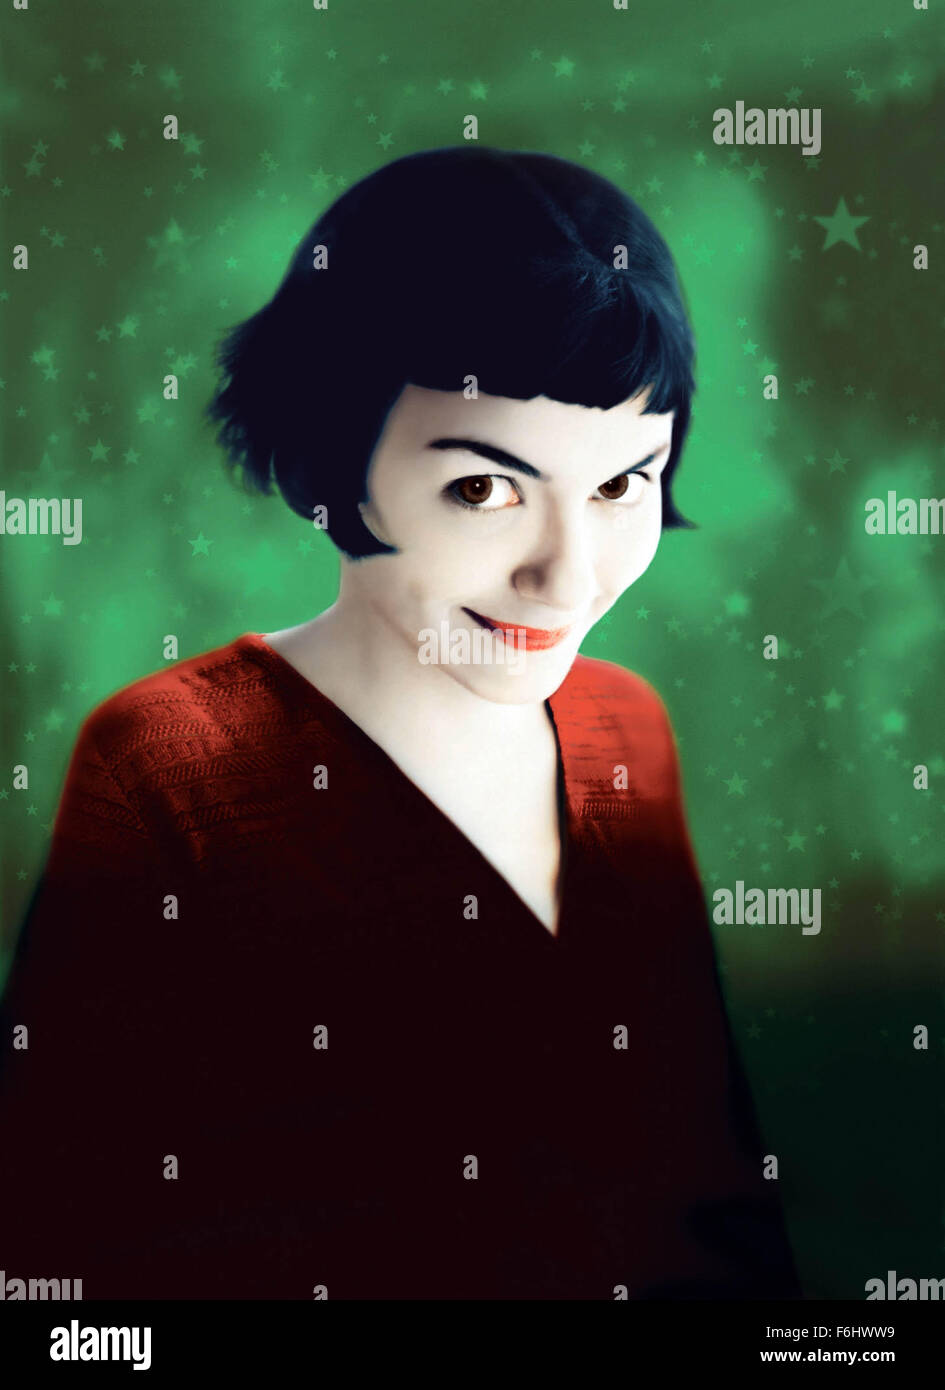 RELEASE DATE: April 25, 2002. MOVIE TITLE: Amelie. STUDIO: Miramax Zoe. PLOT: Amelie, an innocent and naive girl in Paris, with her own sense of justice, decides to help those around her and along the way, discovers love. PICTURED: AUDREY TAUTOU as Amelie Poulain. Stock Photo